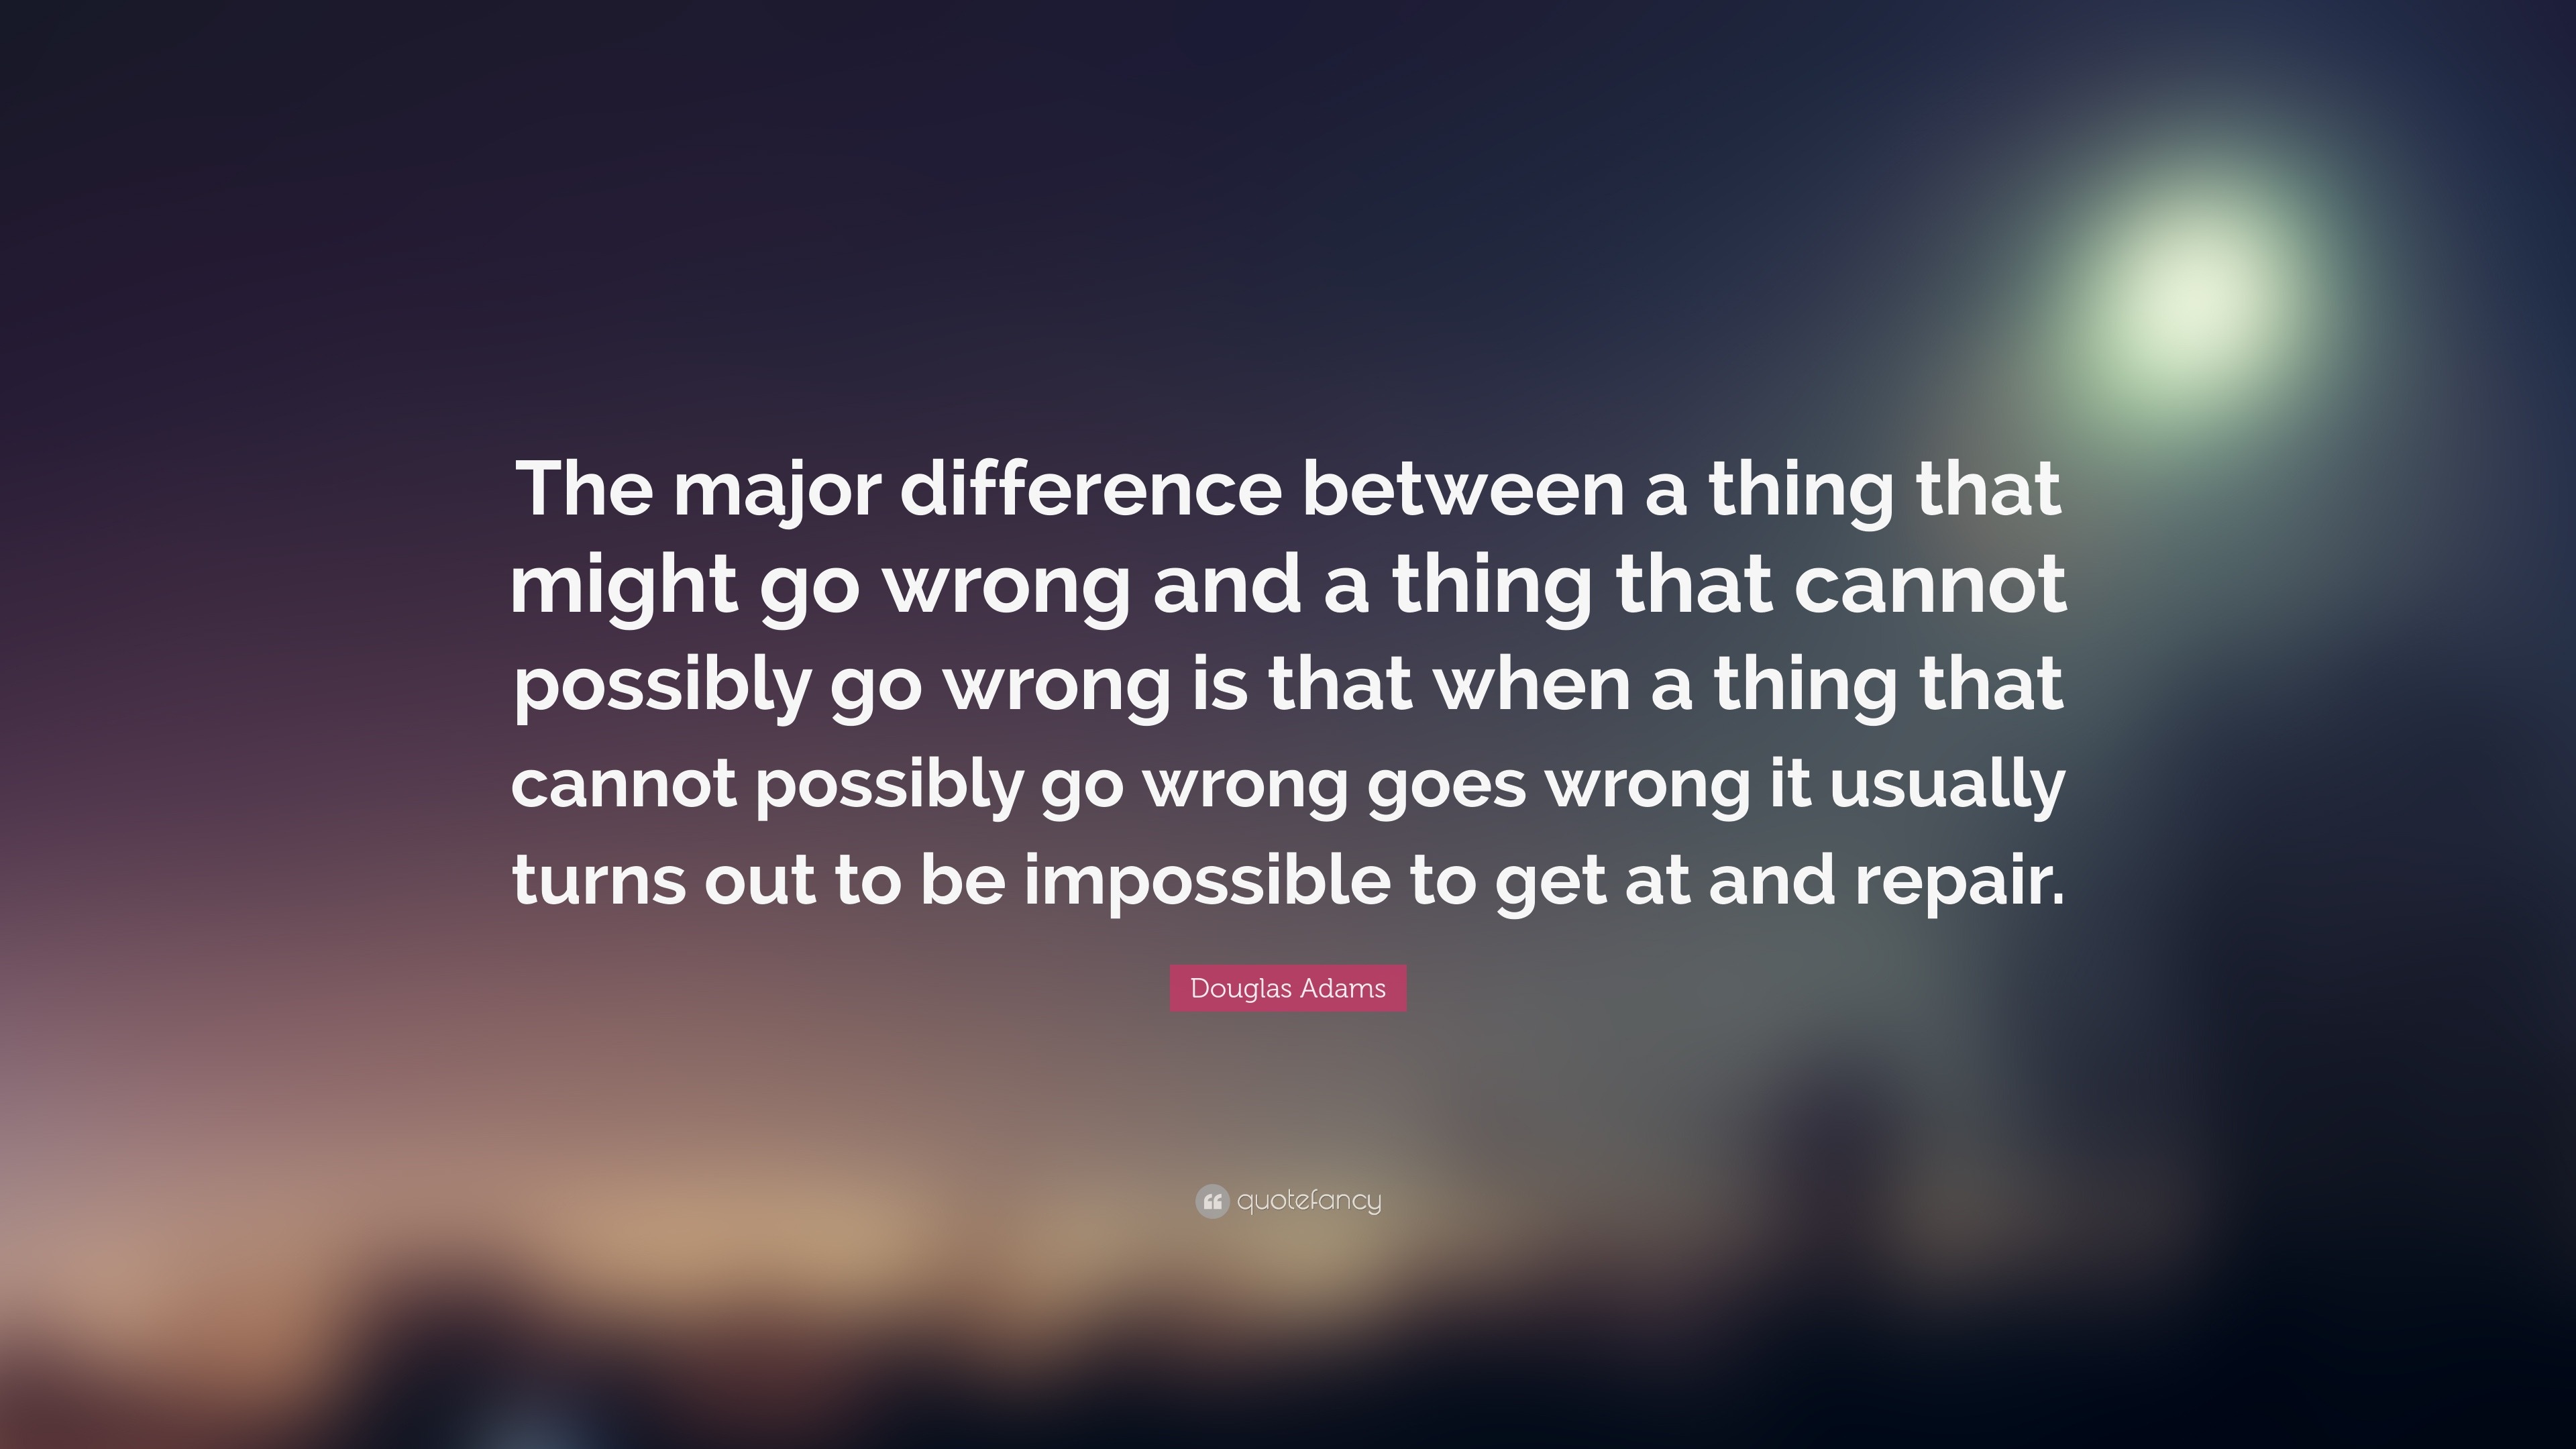 Douglas Adams Quote The Major Difference Between A Thing That Might Go Wrong And A Thing That Cannot Possibly Go Wrong Is That When A Thing